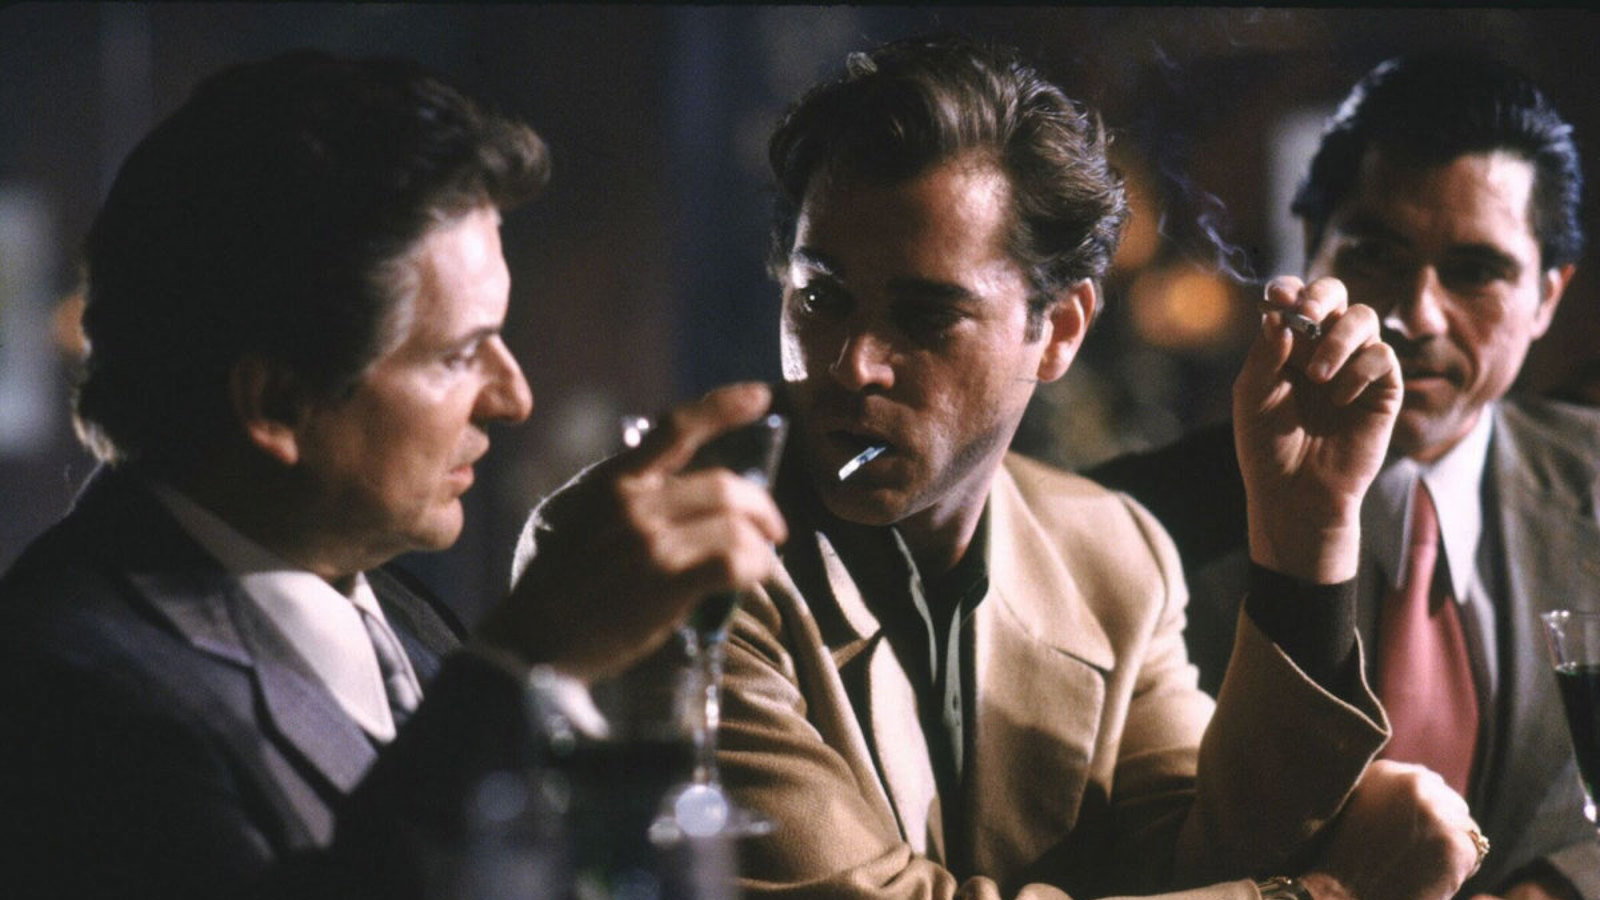 Two tough-looking gangsters sit at a bar, the one on right with a cigarette in his mouth